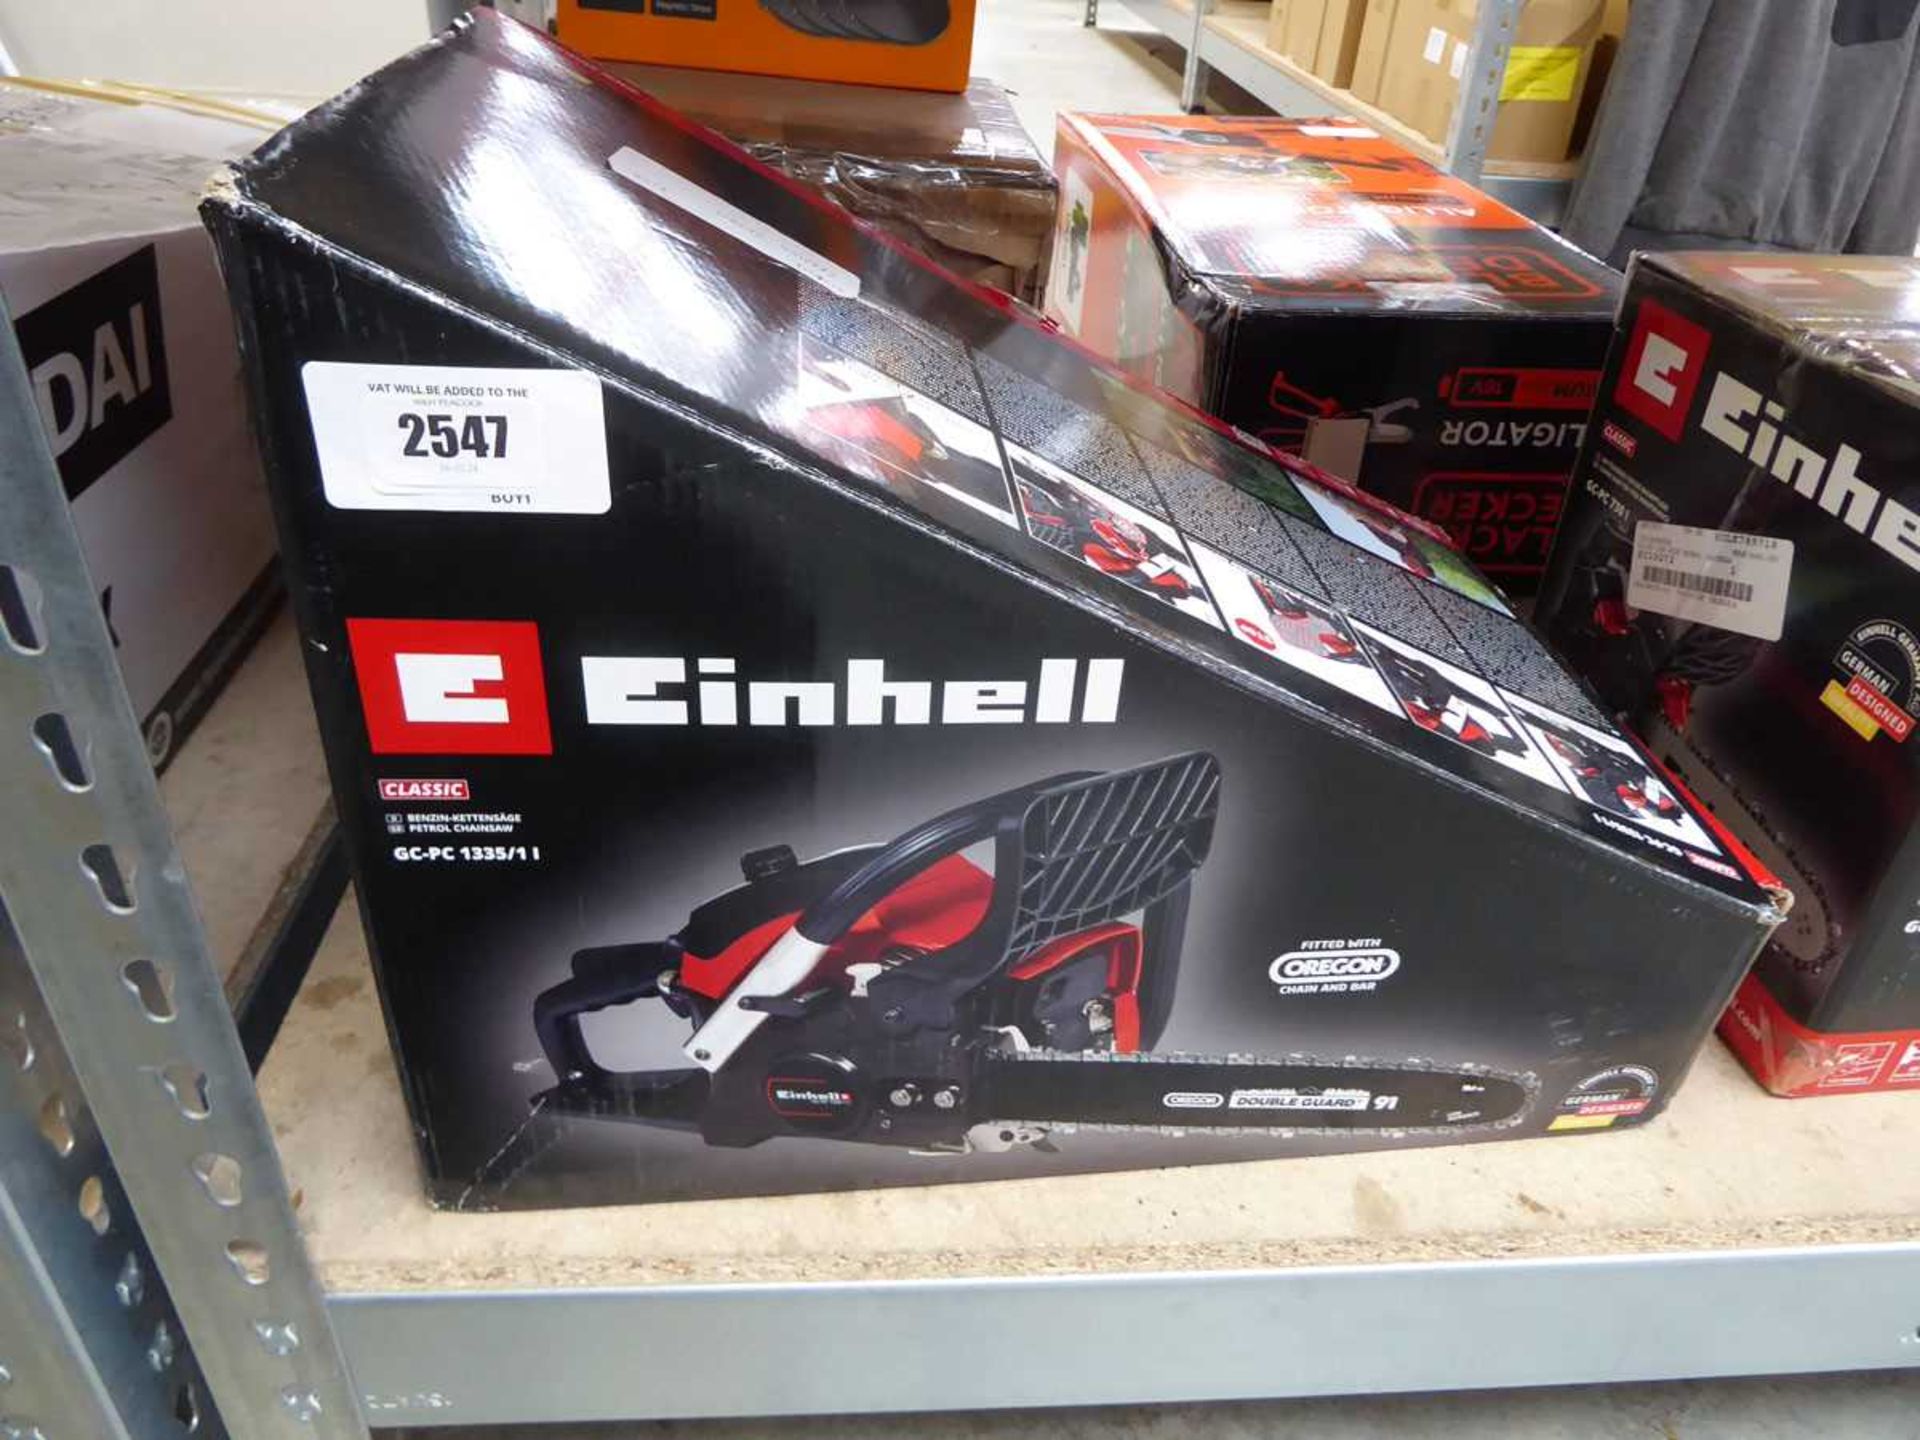 +VAT Boxed Einhell petrol chainsaw (GC-PC1335/11)